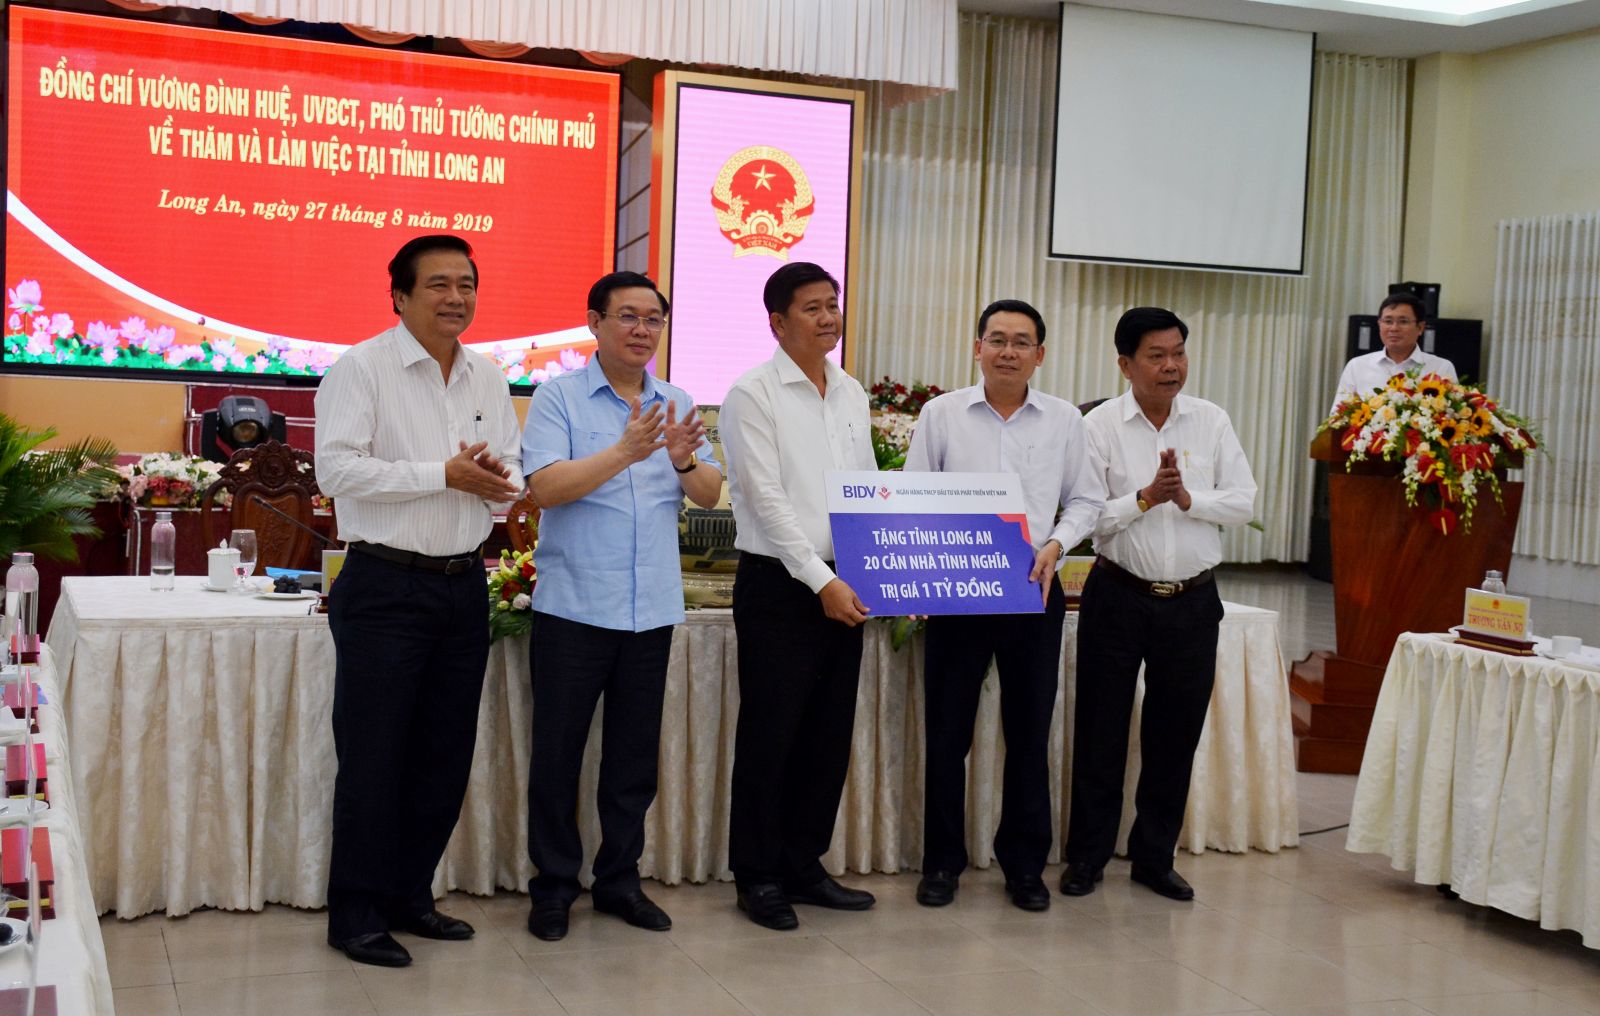 Joint Stock Commercial Bank for Investment and Development of Vietnam (BIDV) has awarded Long An province 20 gratitude houses of worth 1 billion VND